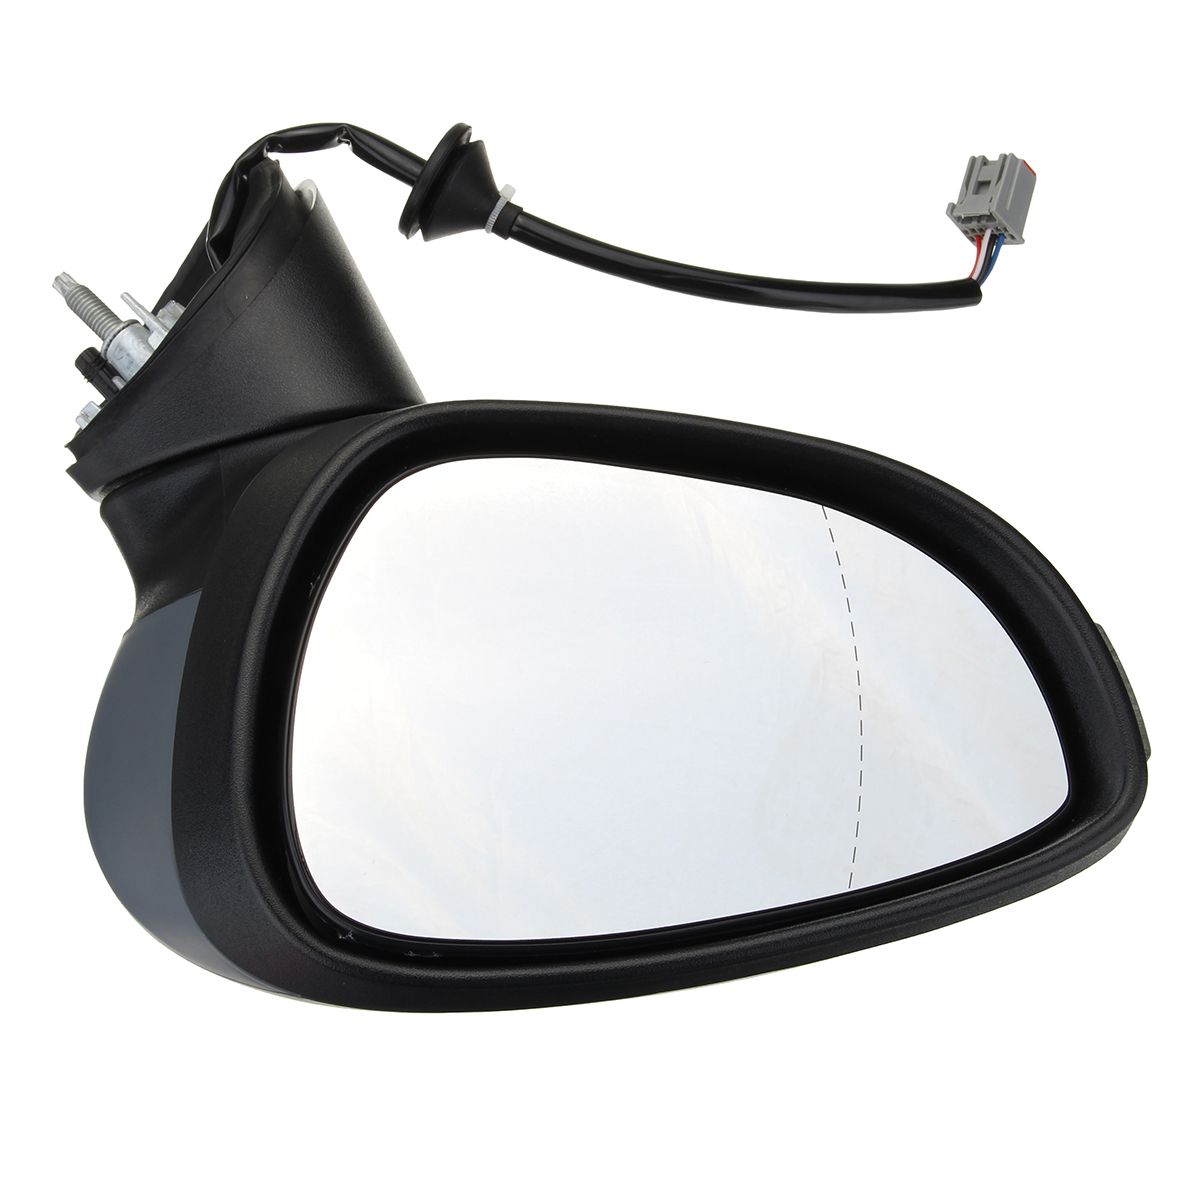 Car-Door-Wing-Mirror-Indicator-Driver-Passenger-Side-Manual-Fold-Left--Right-For-Ford-Fiesta-09-17-1609251